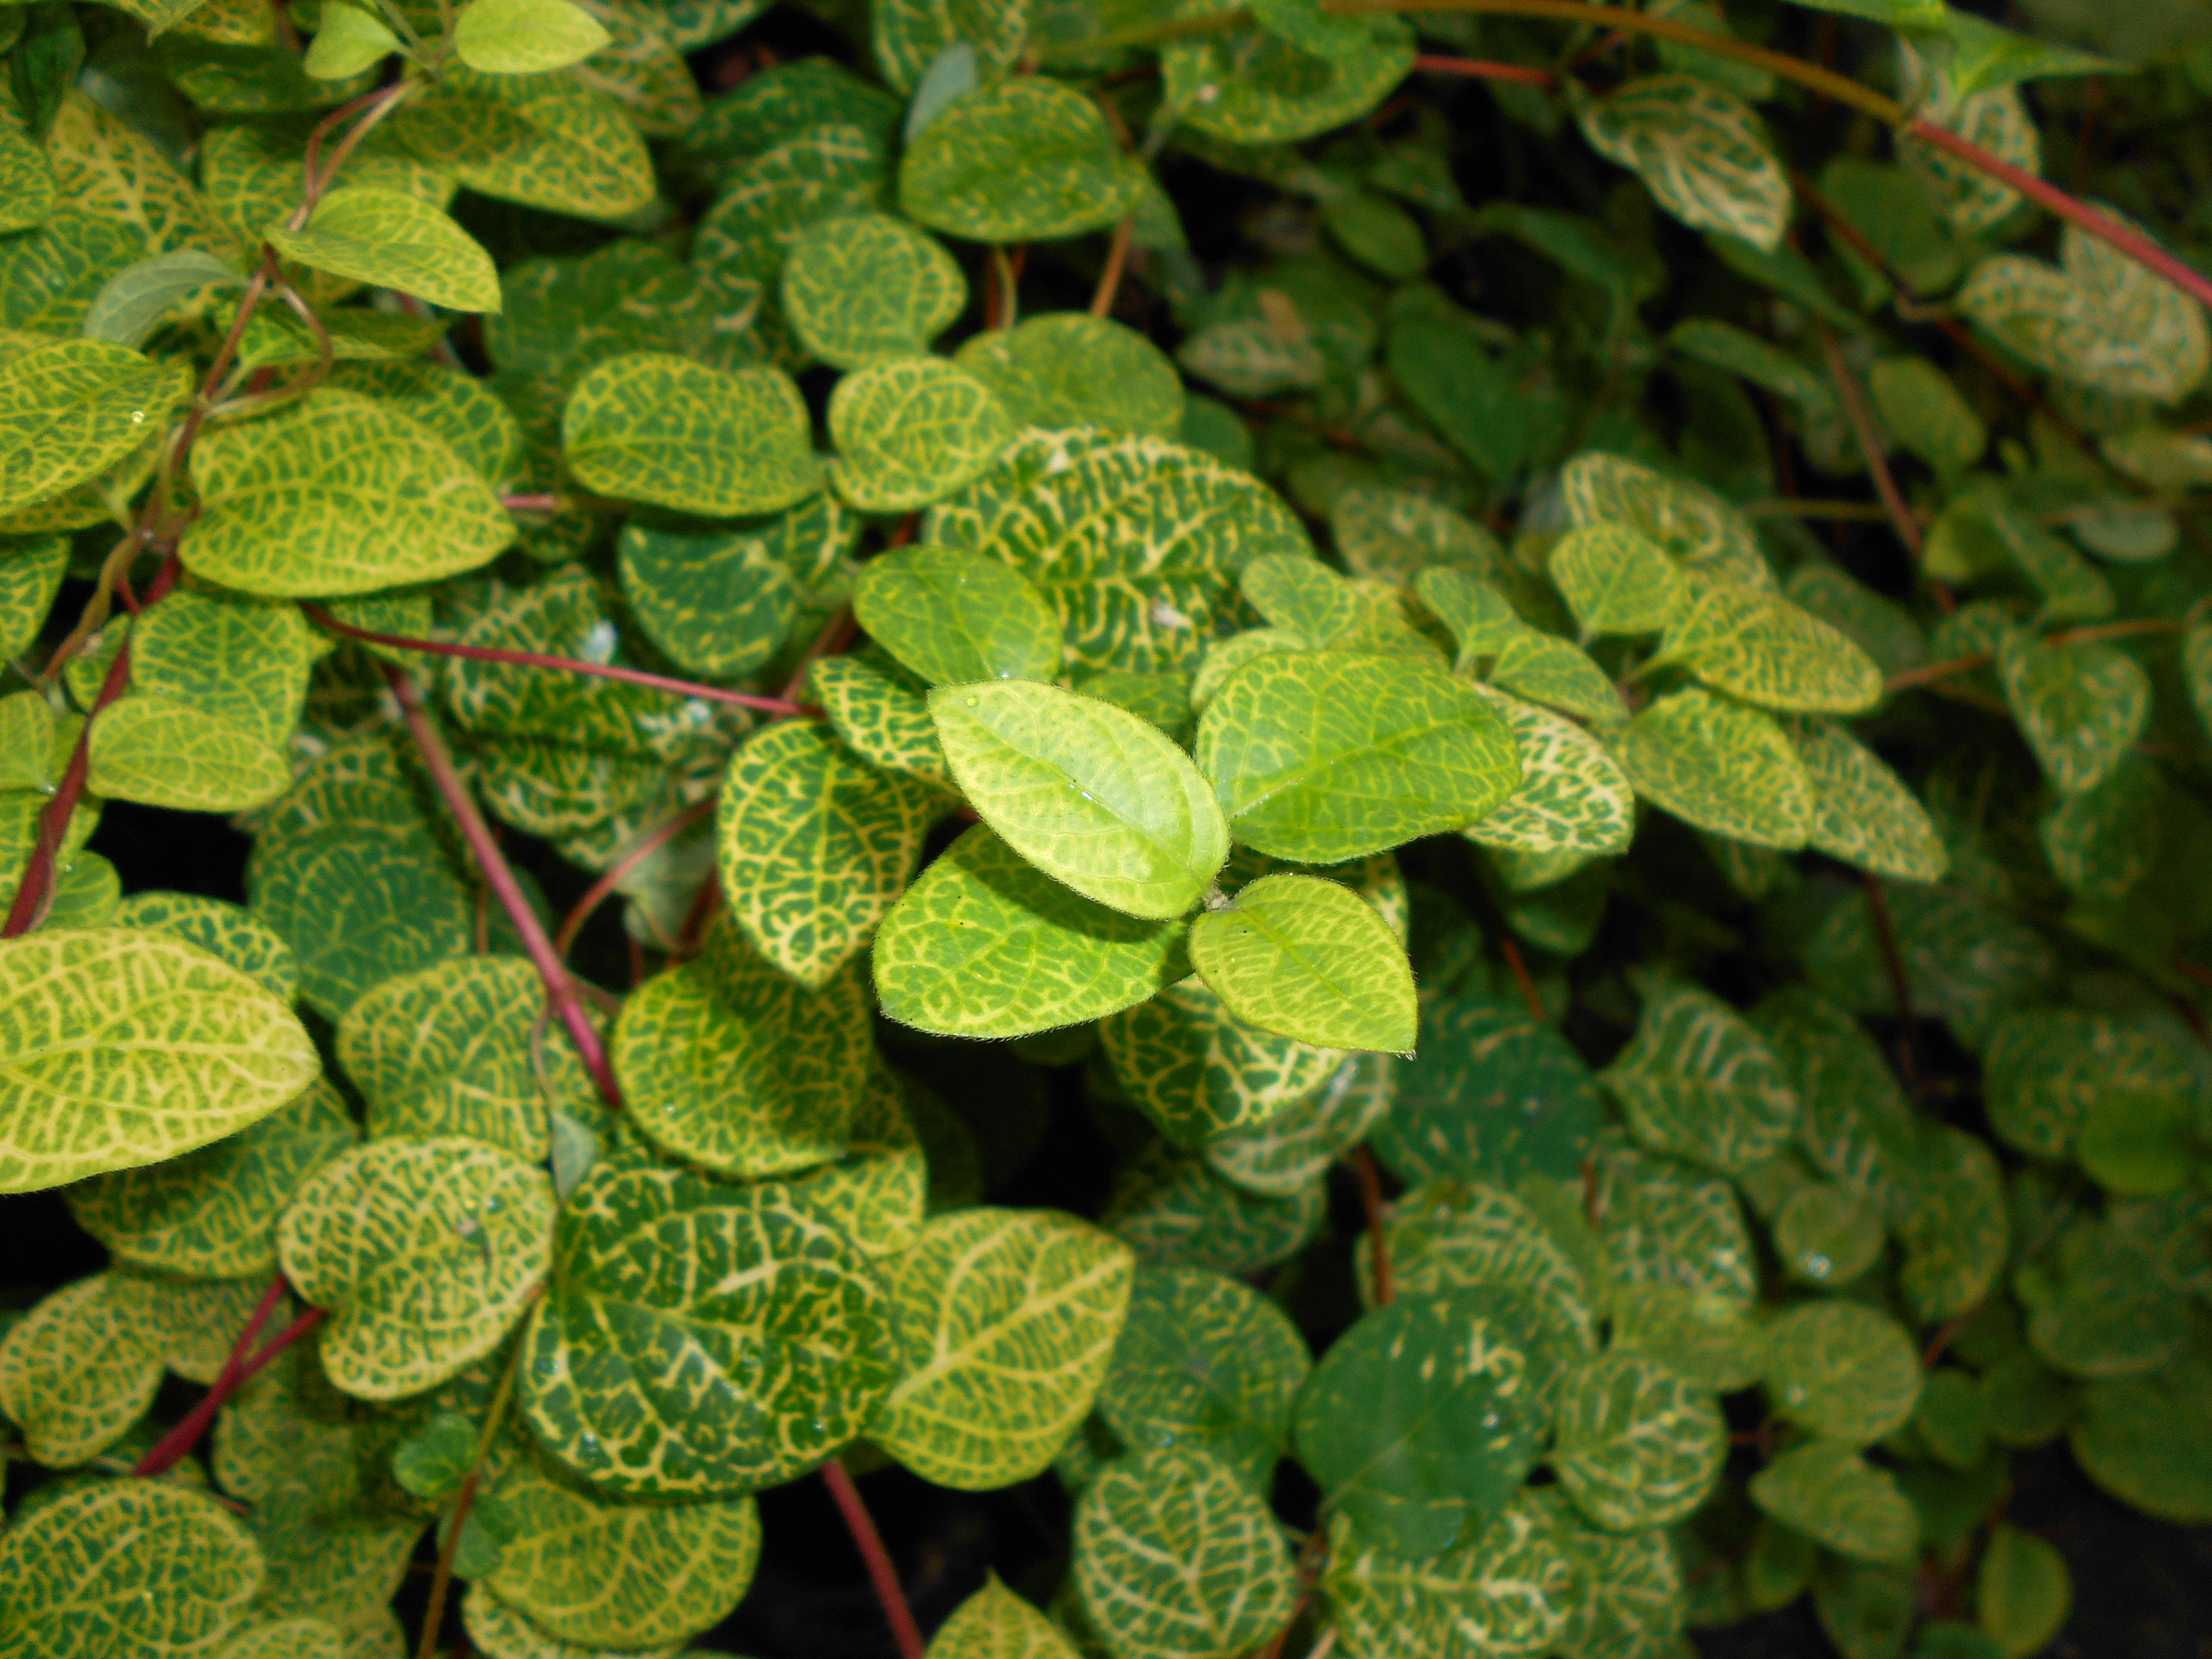 yellow-green leaves with red-brown stems